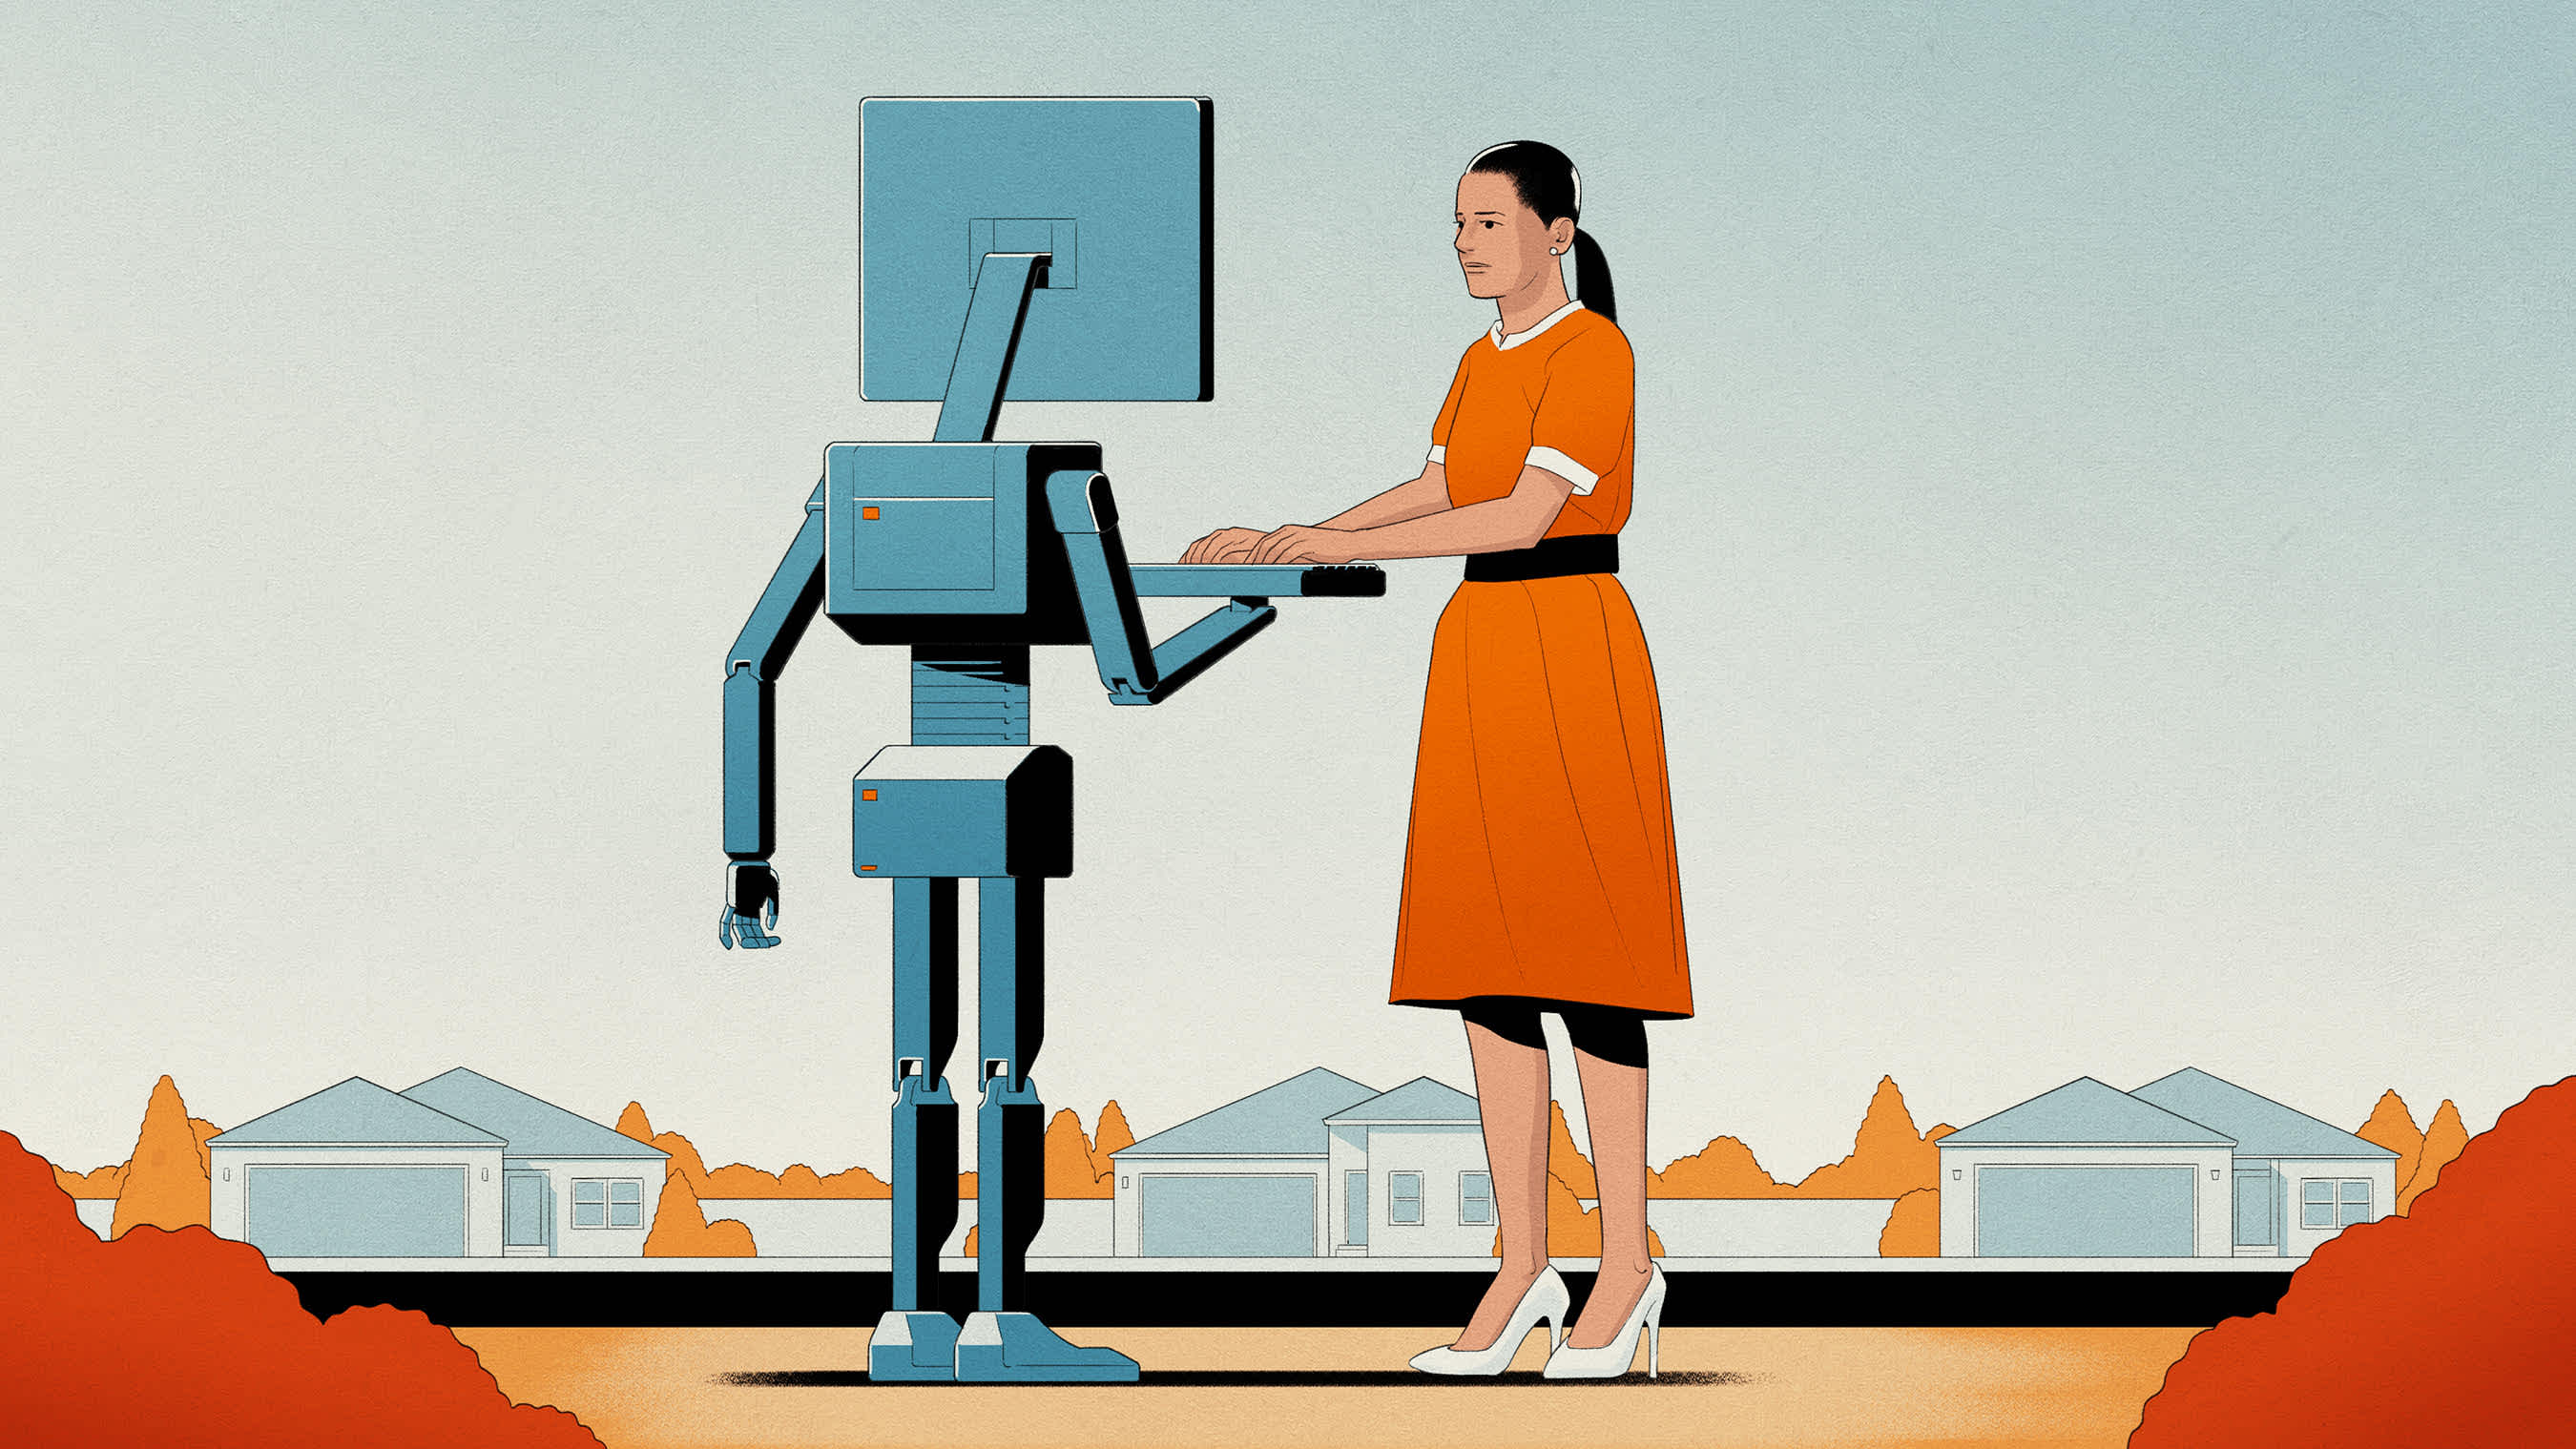 A brown-haired woman in an orange dress, white high heels, and her hair pulled back types types on a humanoid robot in a remote suburban neighborhood. 